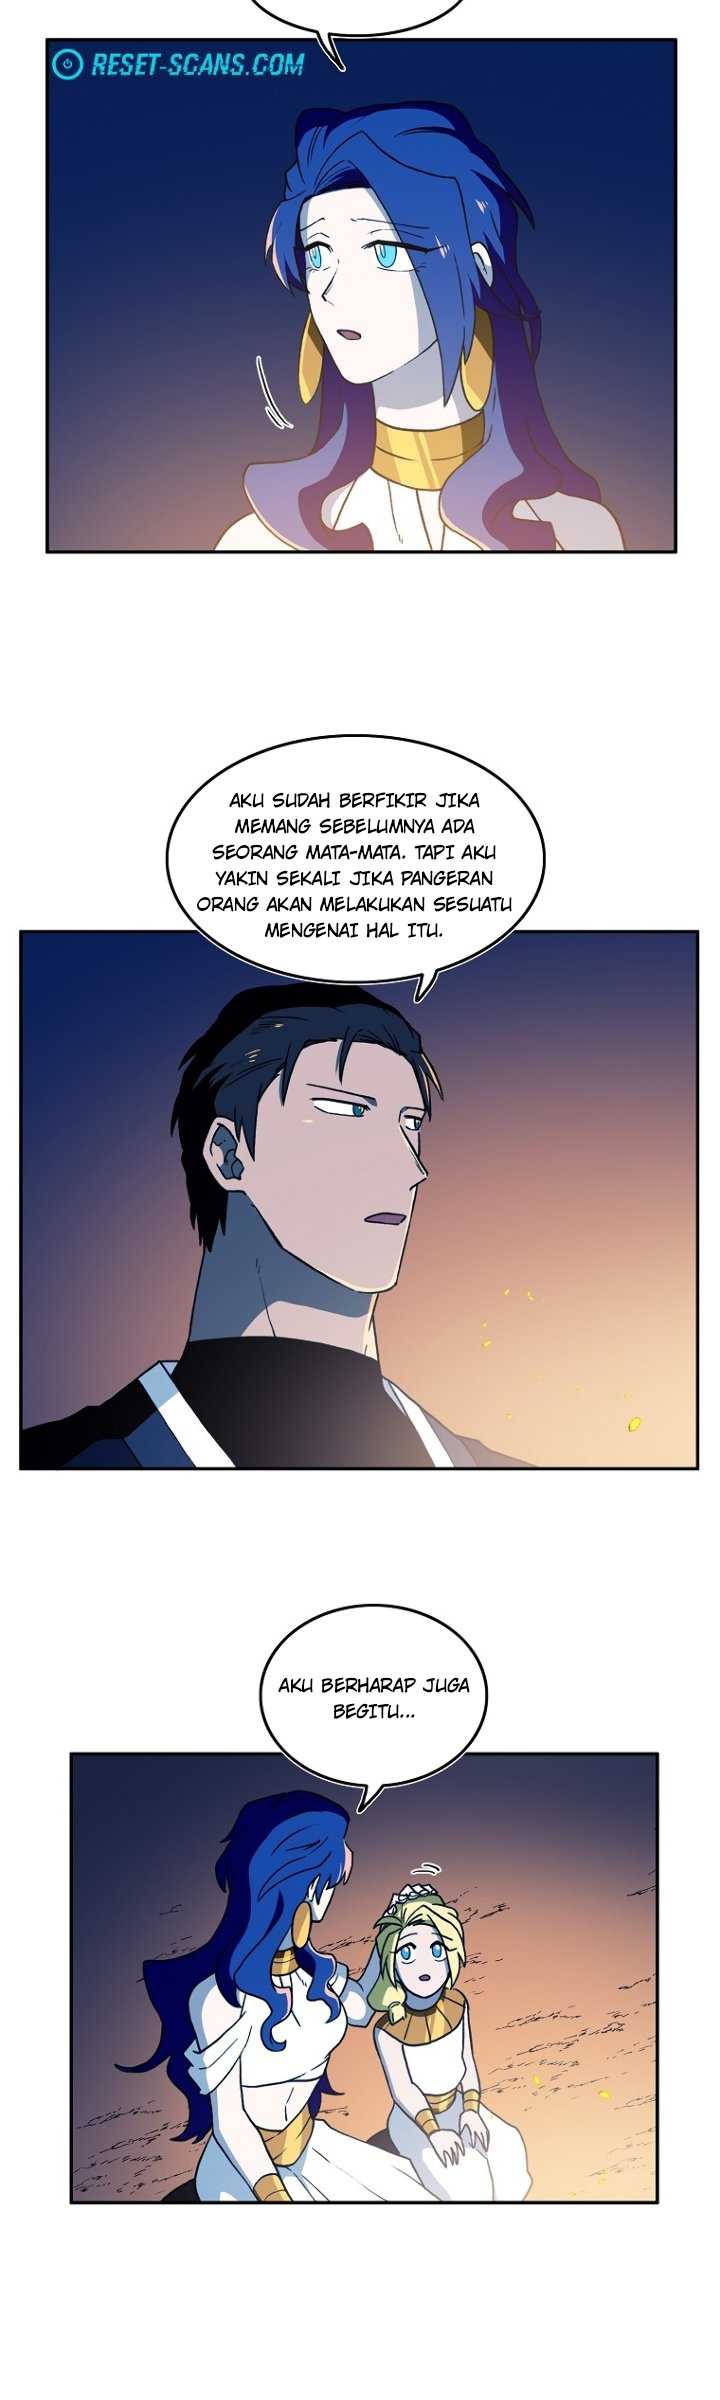 Magical Shooting : Sniper of Steel Chapter 26